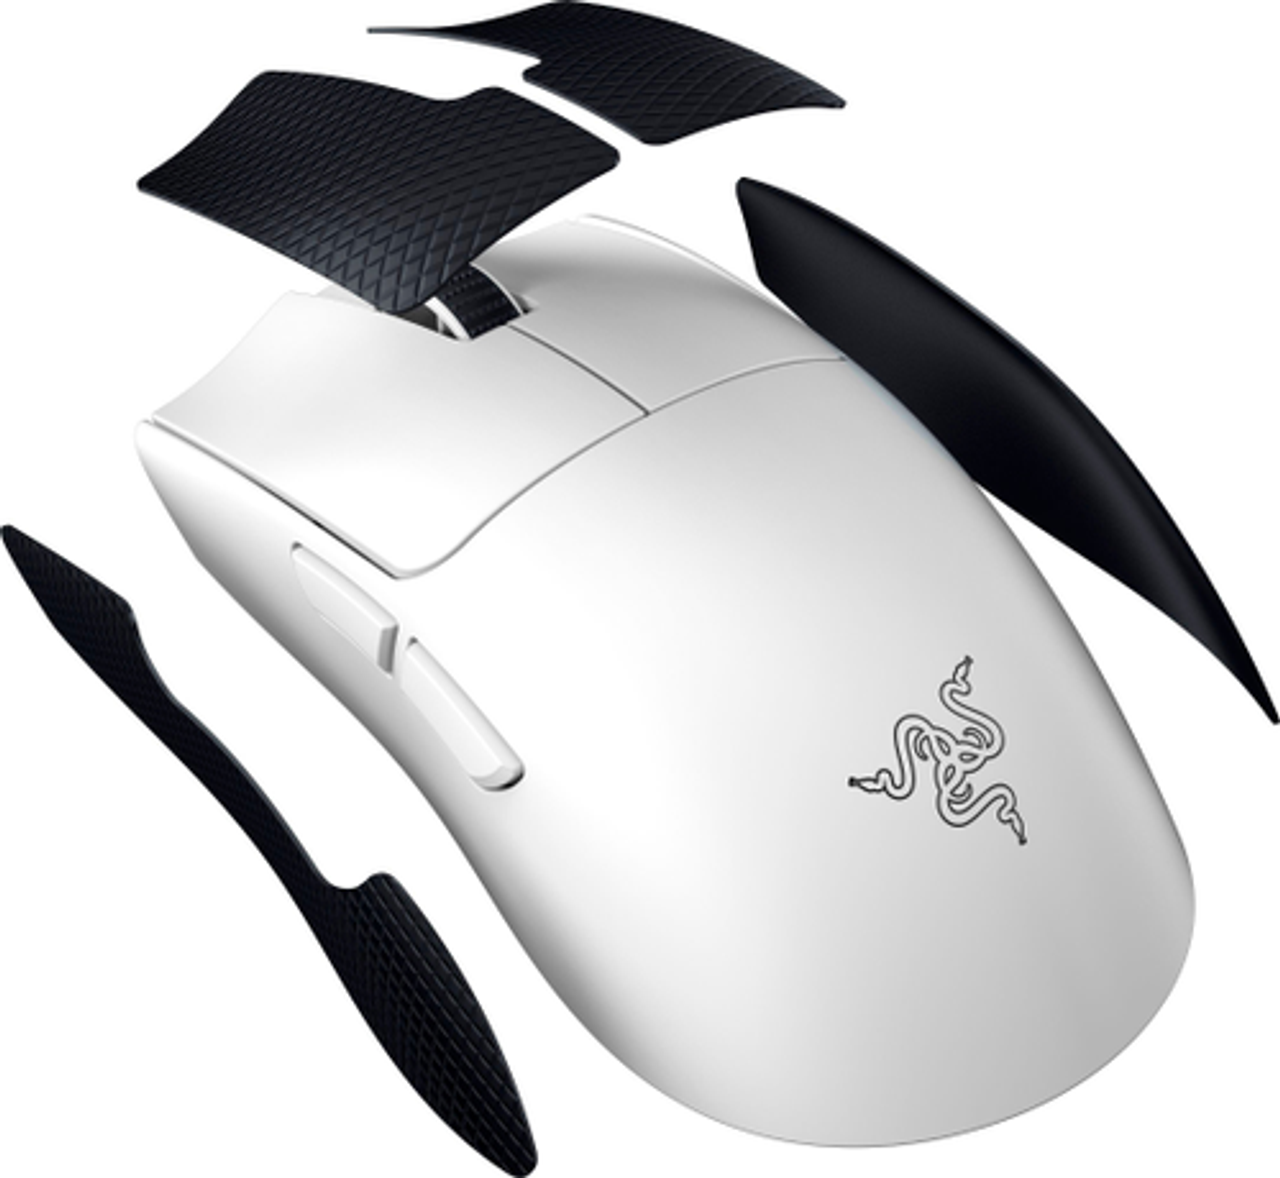 Razer - Viper V3 Pro Ultra-Lightweight Wireless Optical Gaming Mouse with 95 Hour Battery Life - White